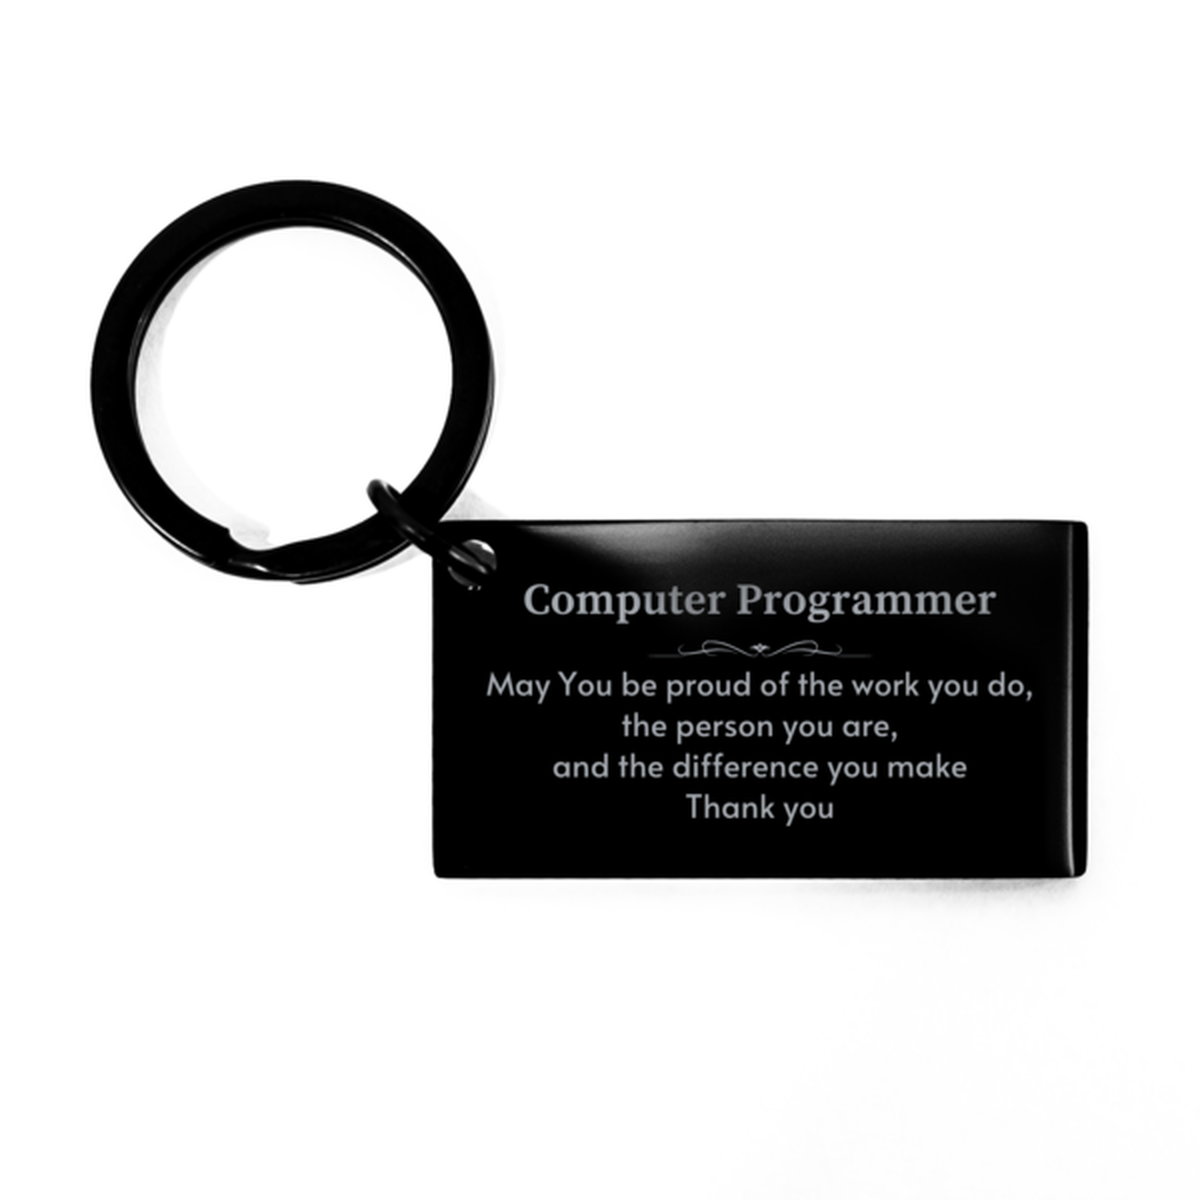 Heartwarming Keychain Retirement Coworkers Gifts for Computer Programmer, EMT May You be proud of the work you do, the person you are Gifts for Boss Men Women Friends